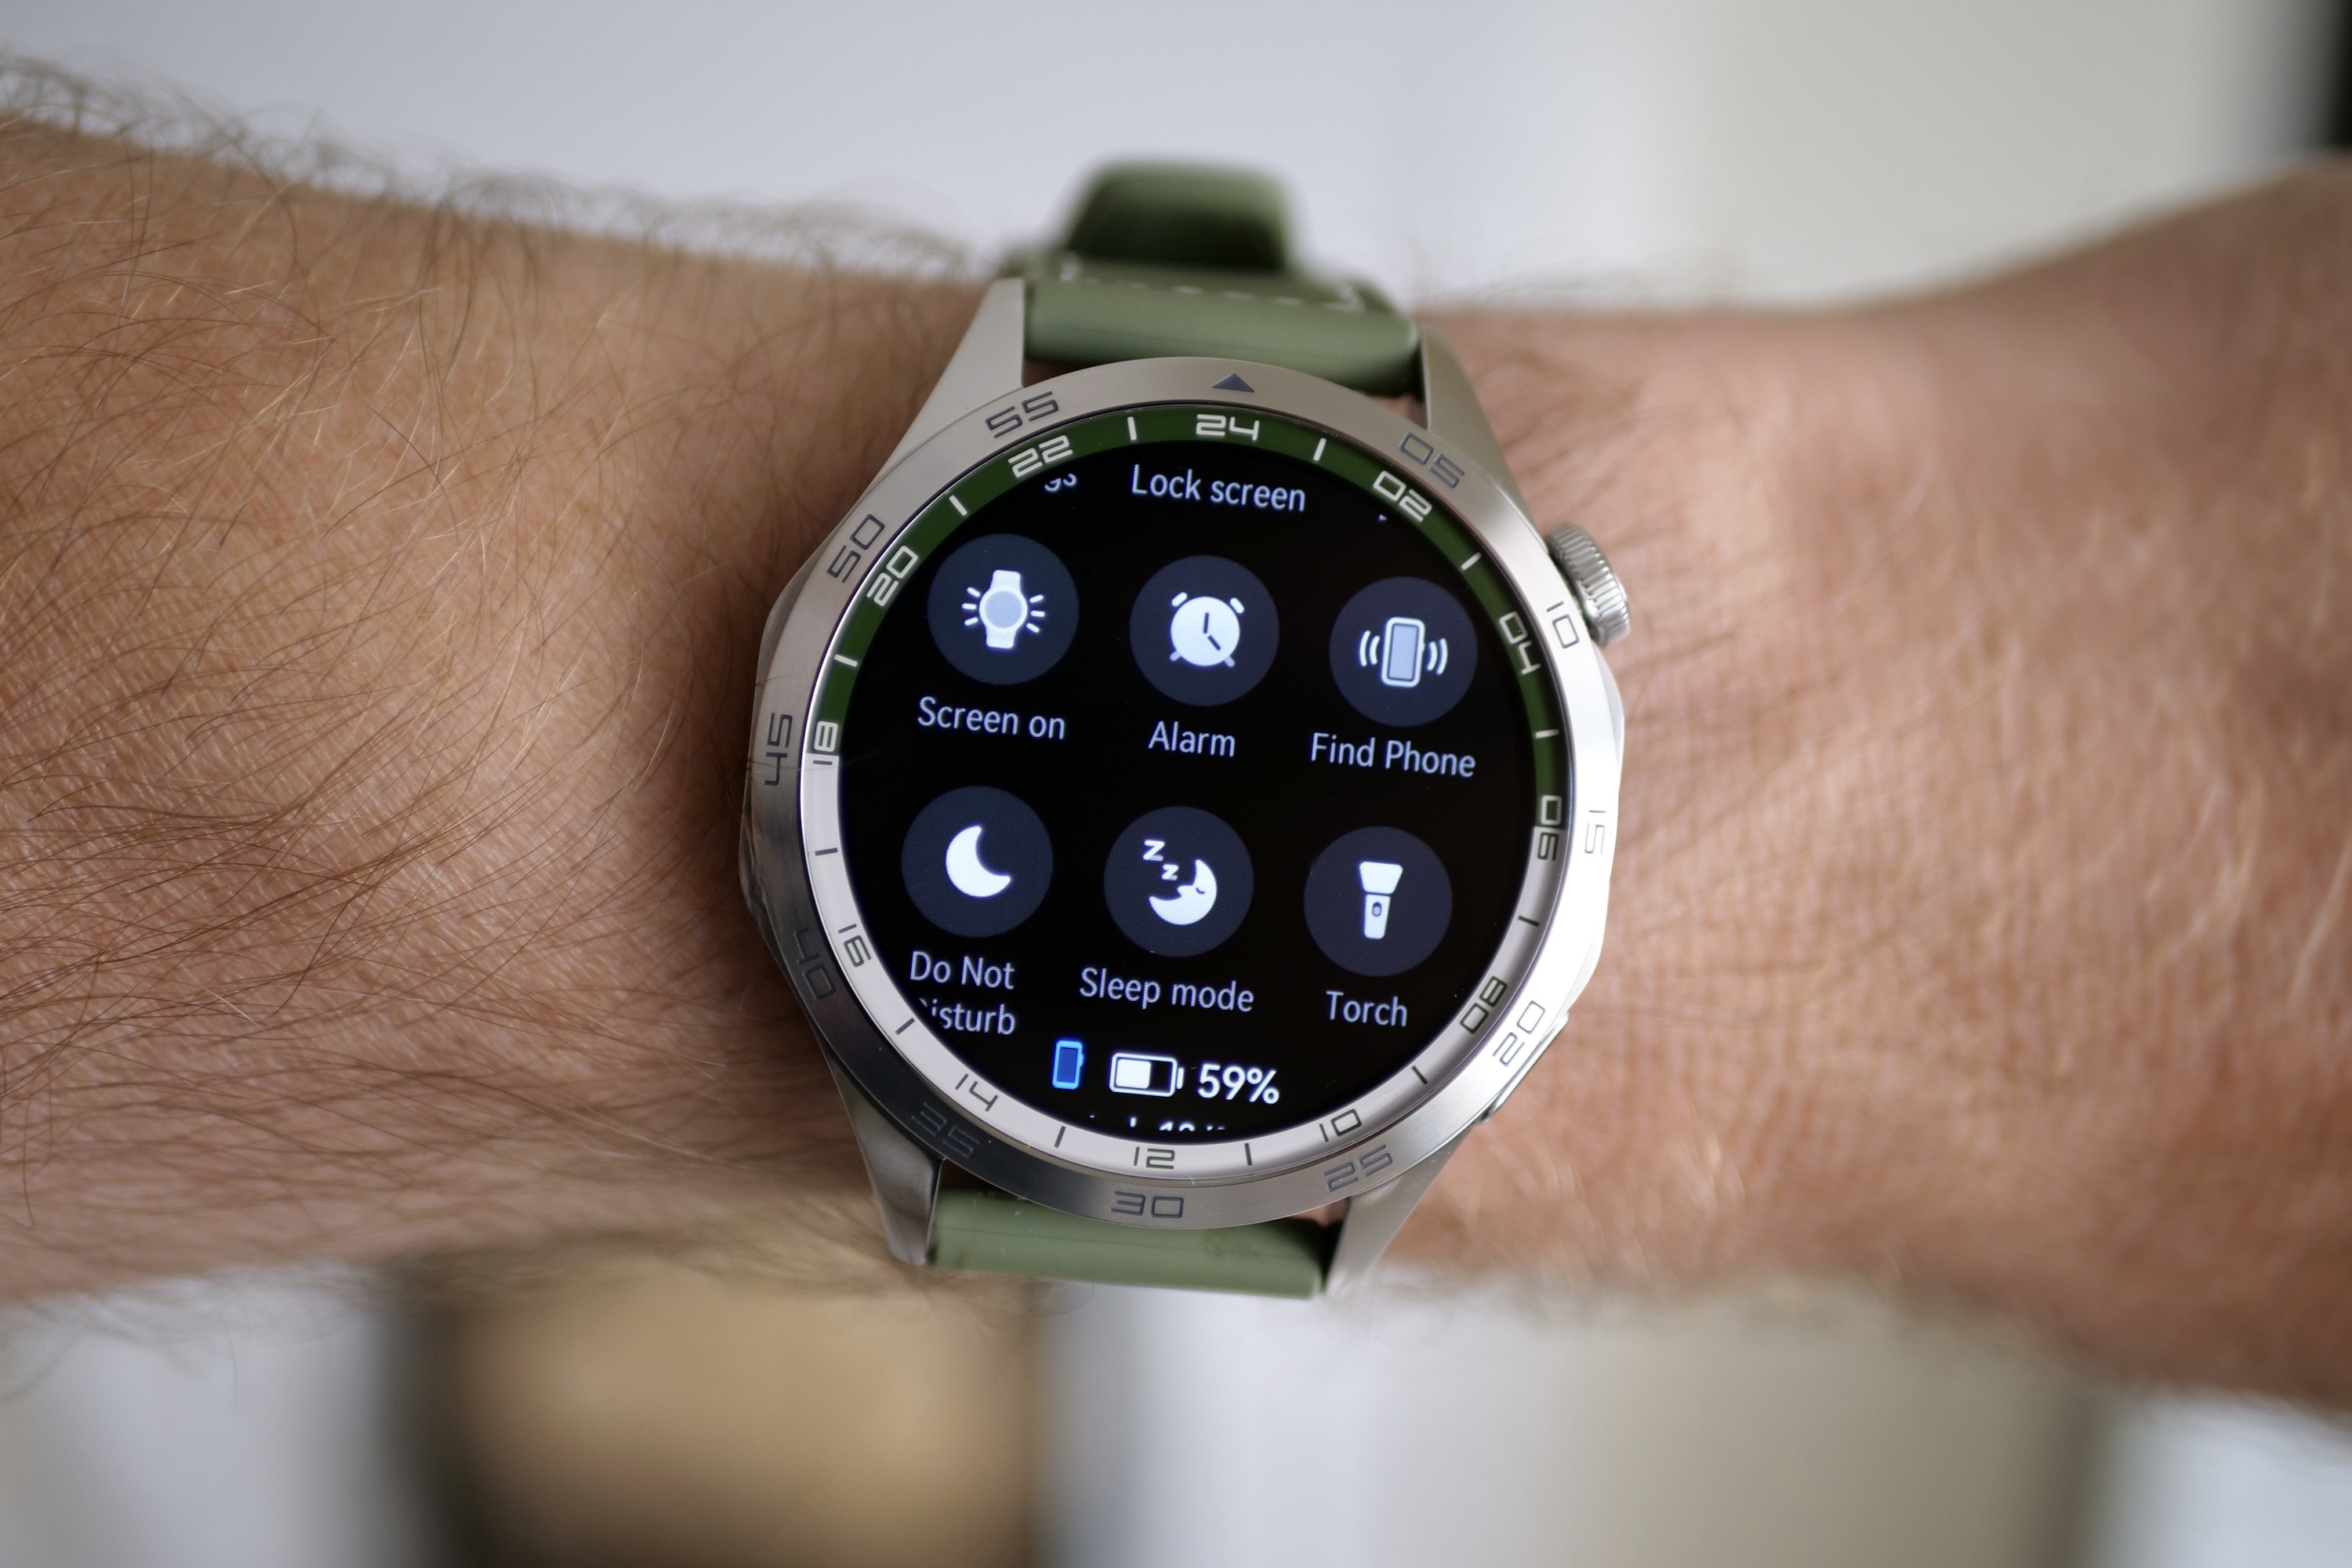 Buy this smartwatch, but only if you own a certain phone